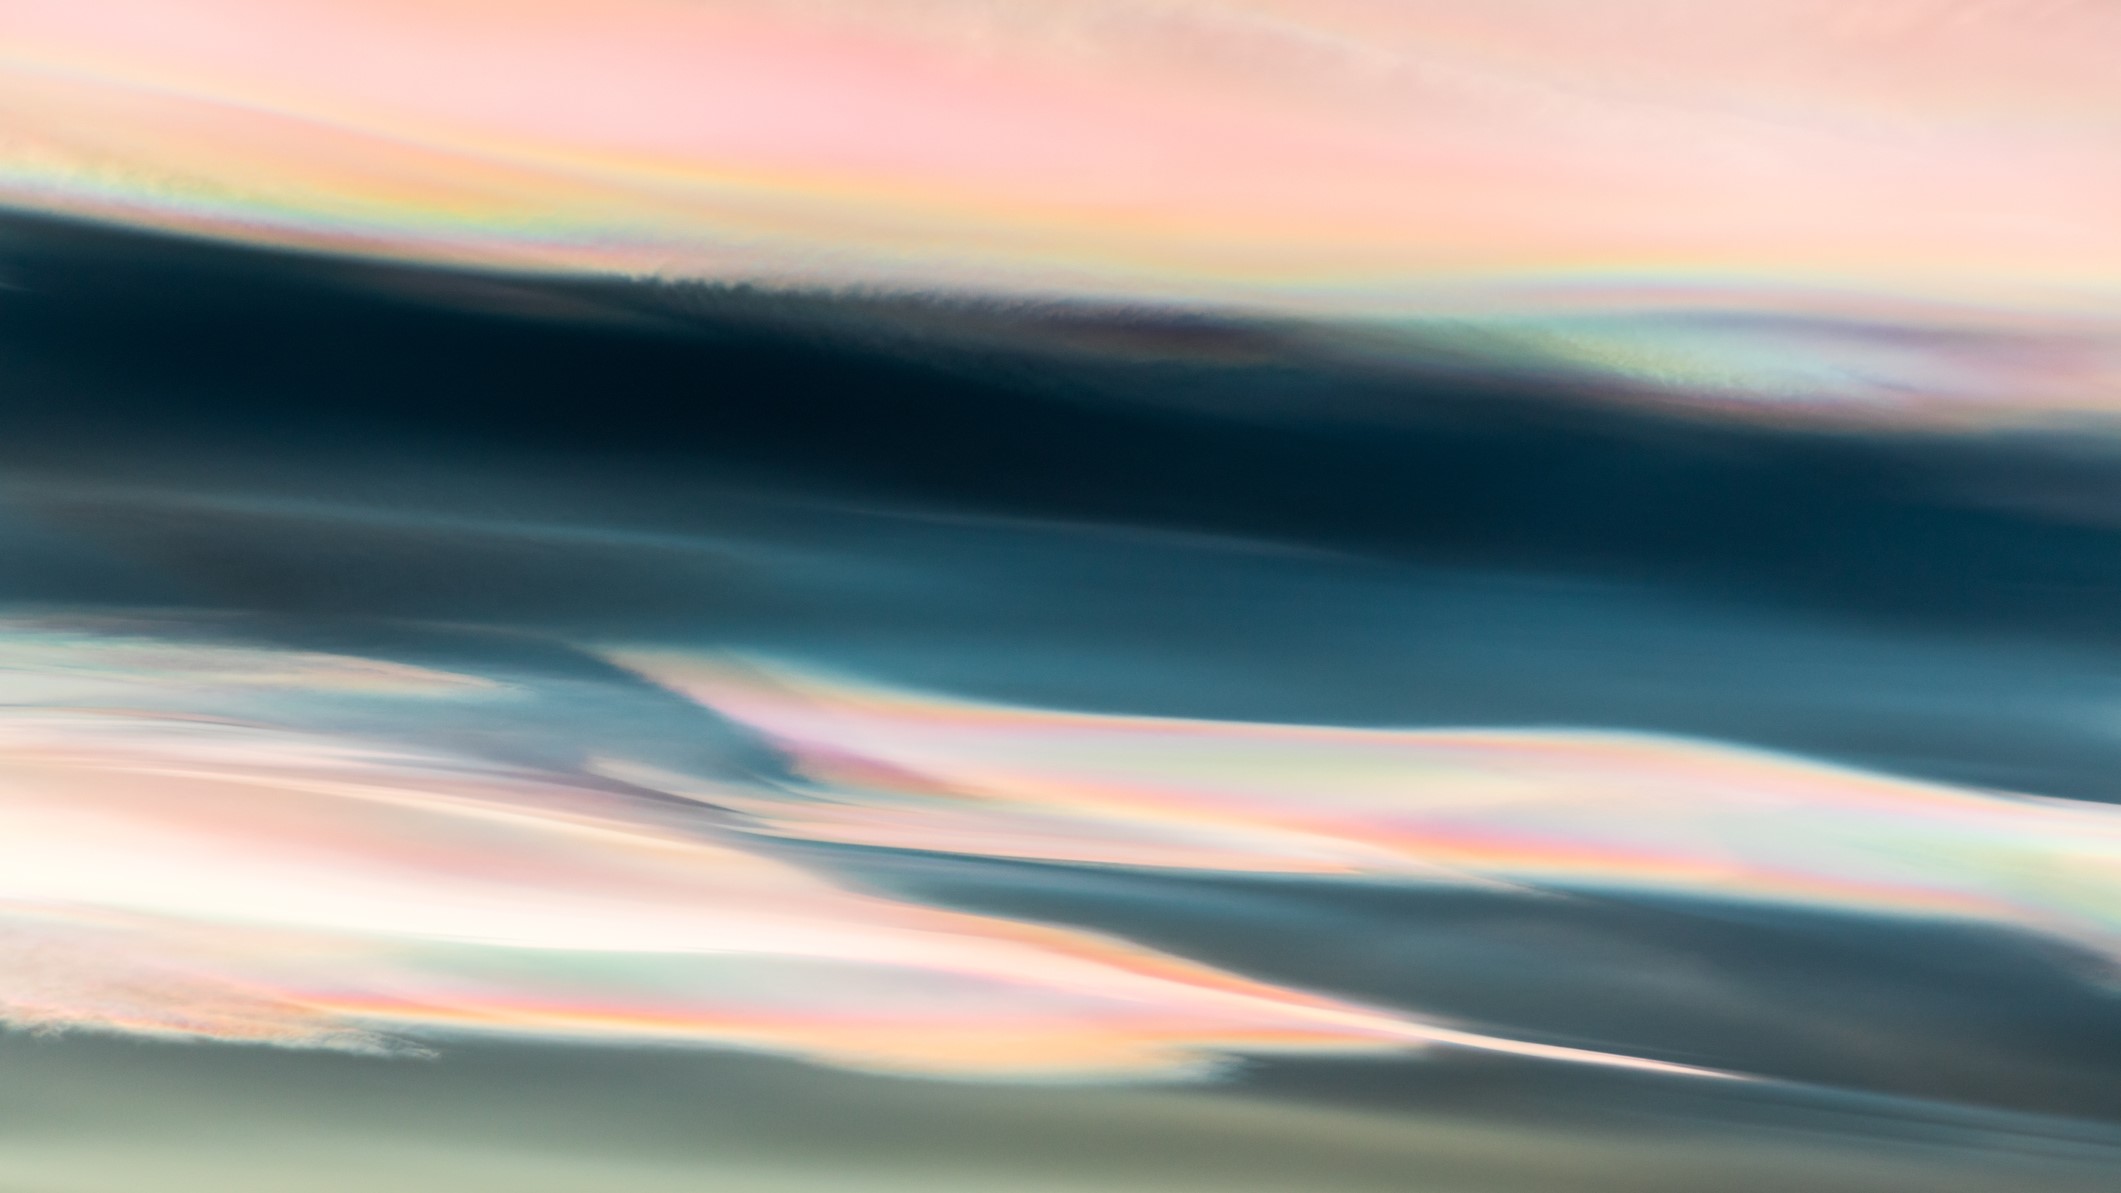 close up photograph of nacreous clouds shining pastel colors of pink, orange, yellow, blue, purple and green.